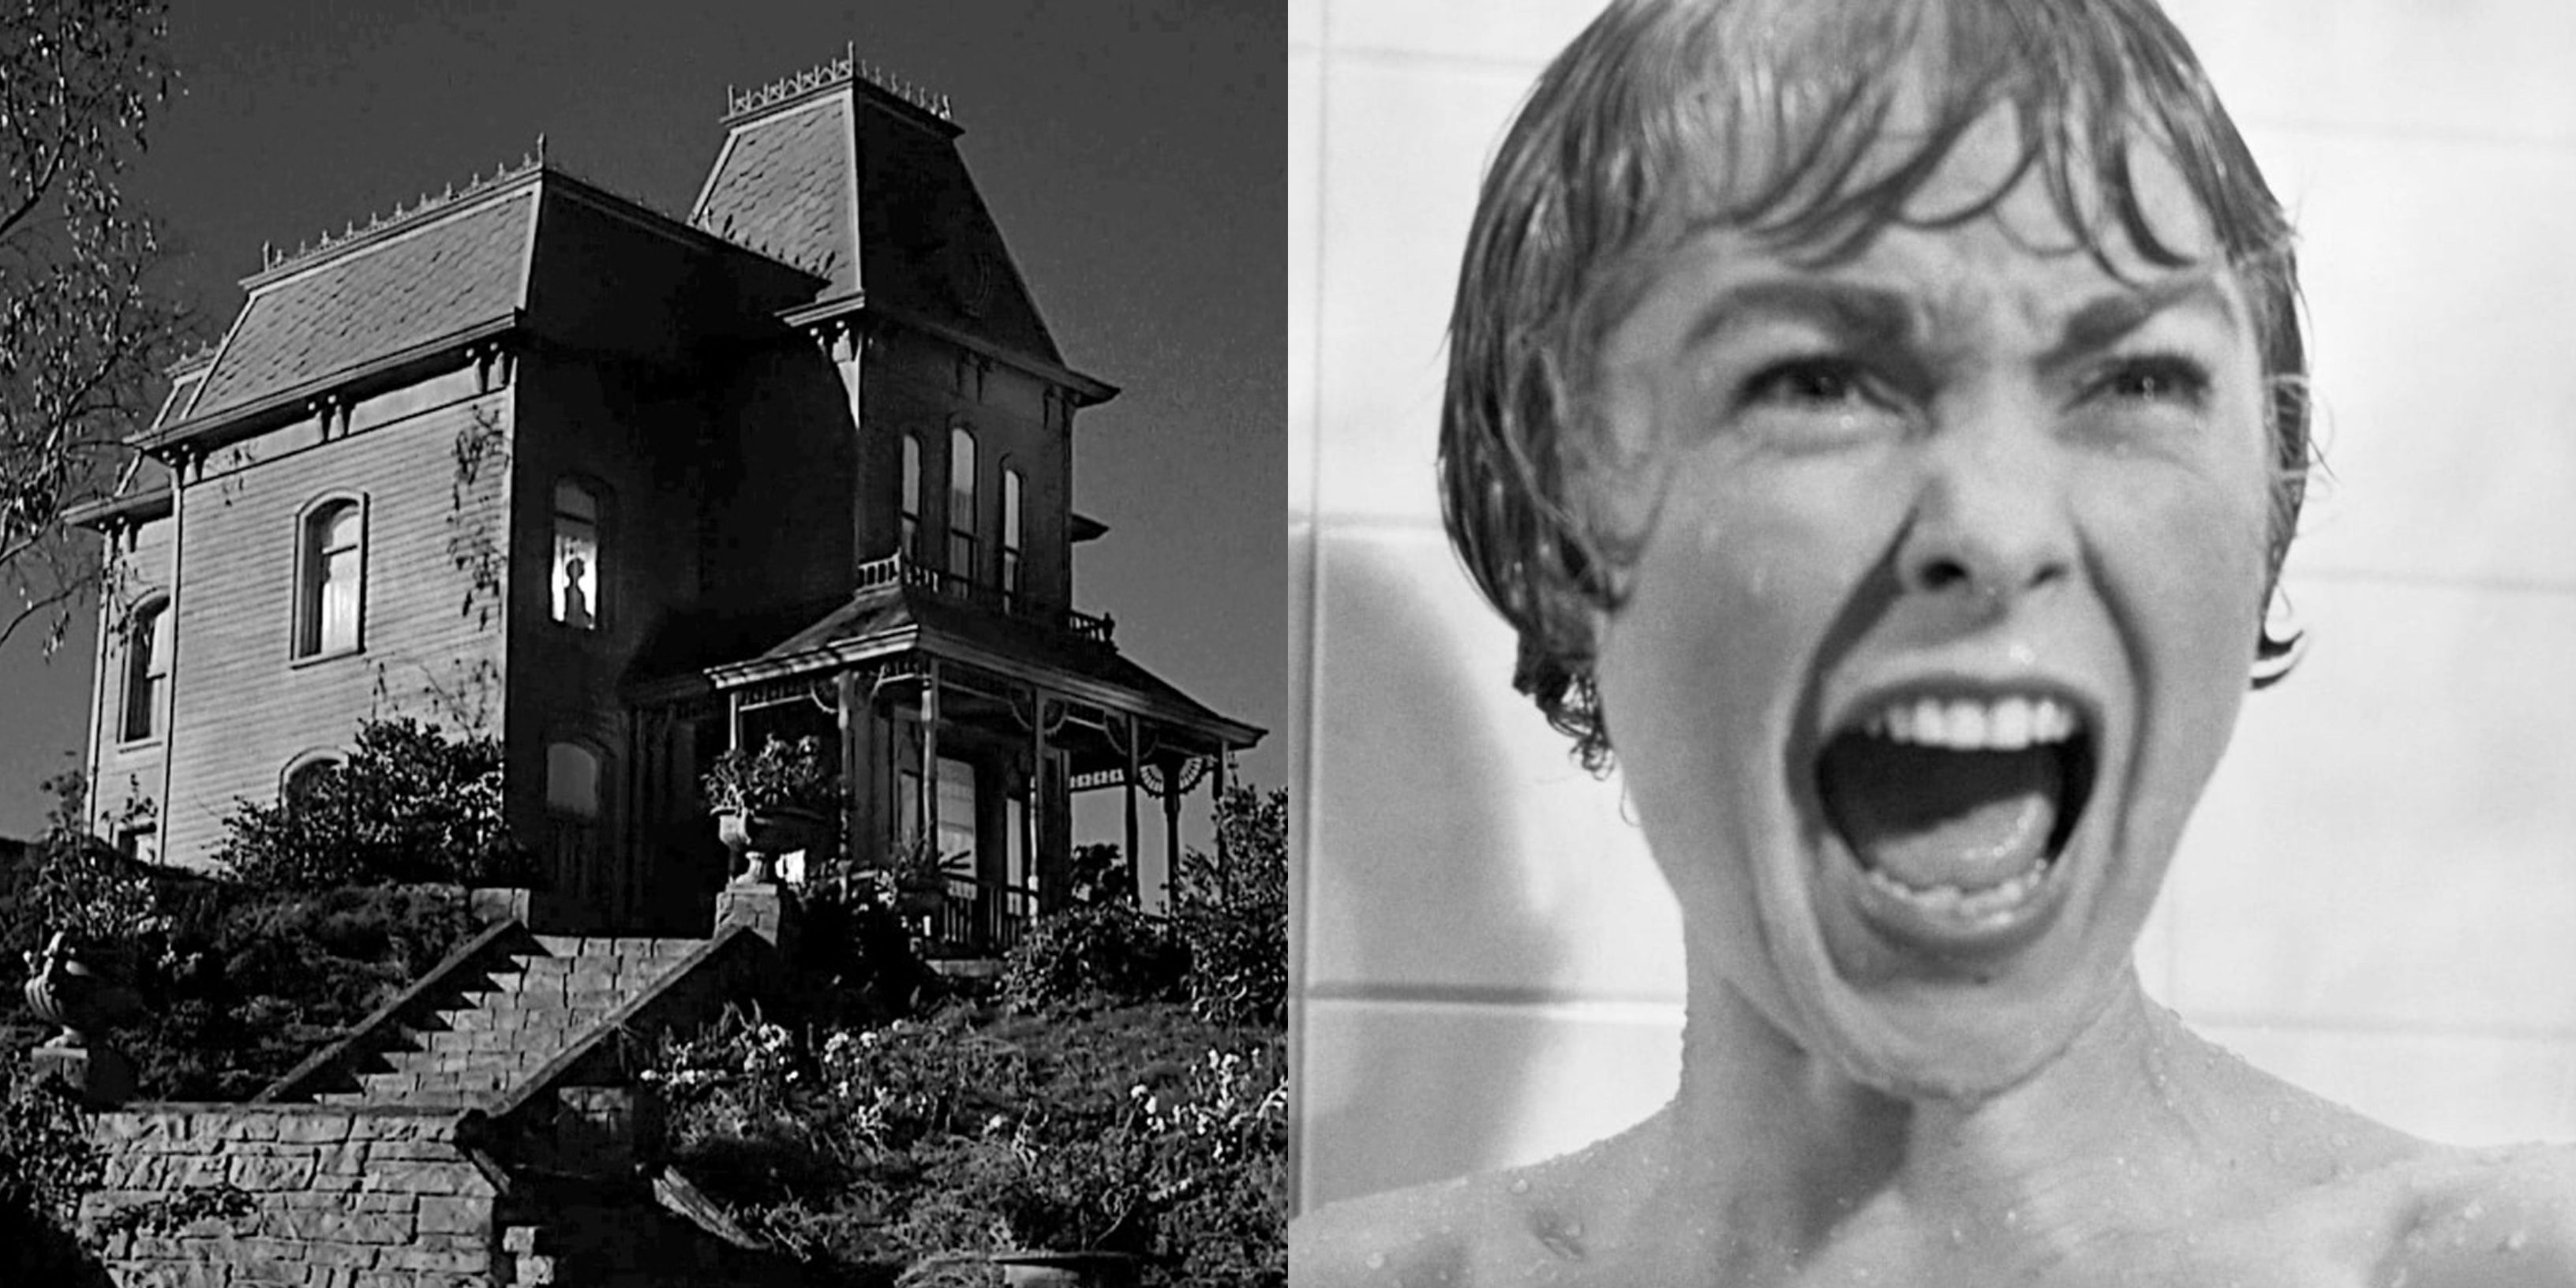 Left: the house from Psycho; right: main character screaming